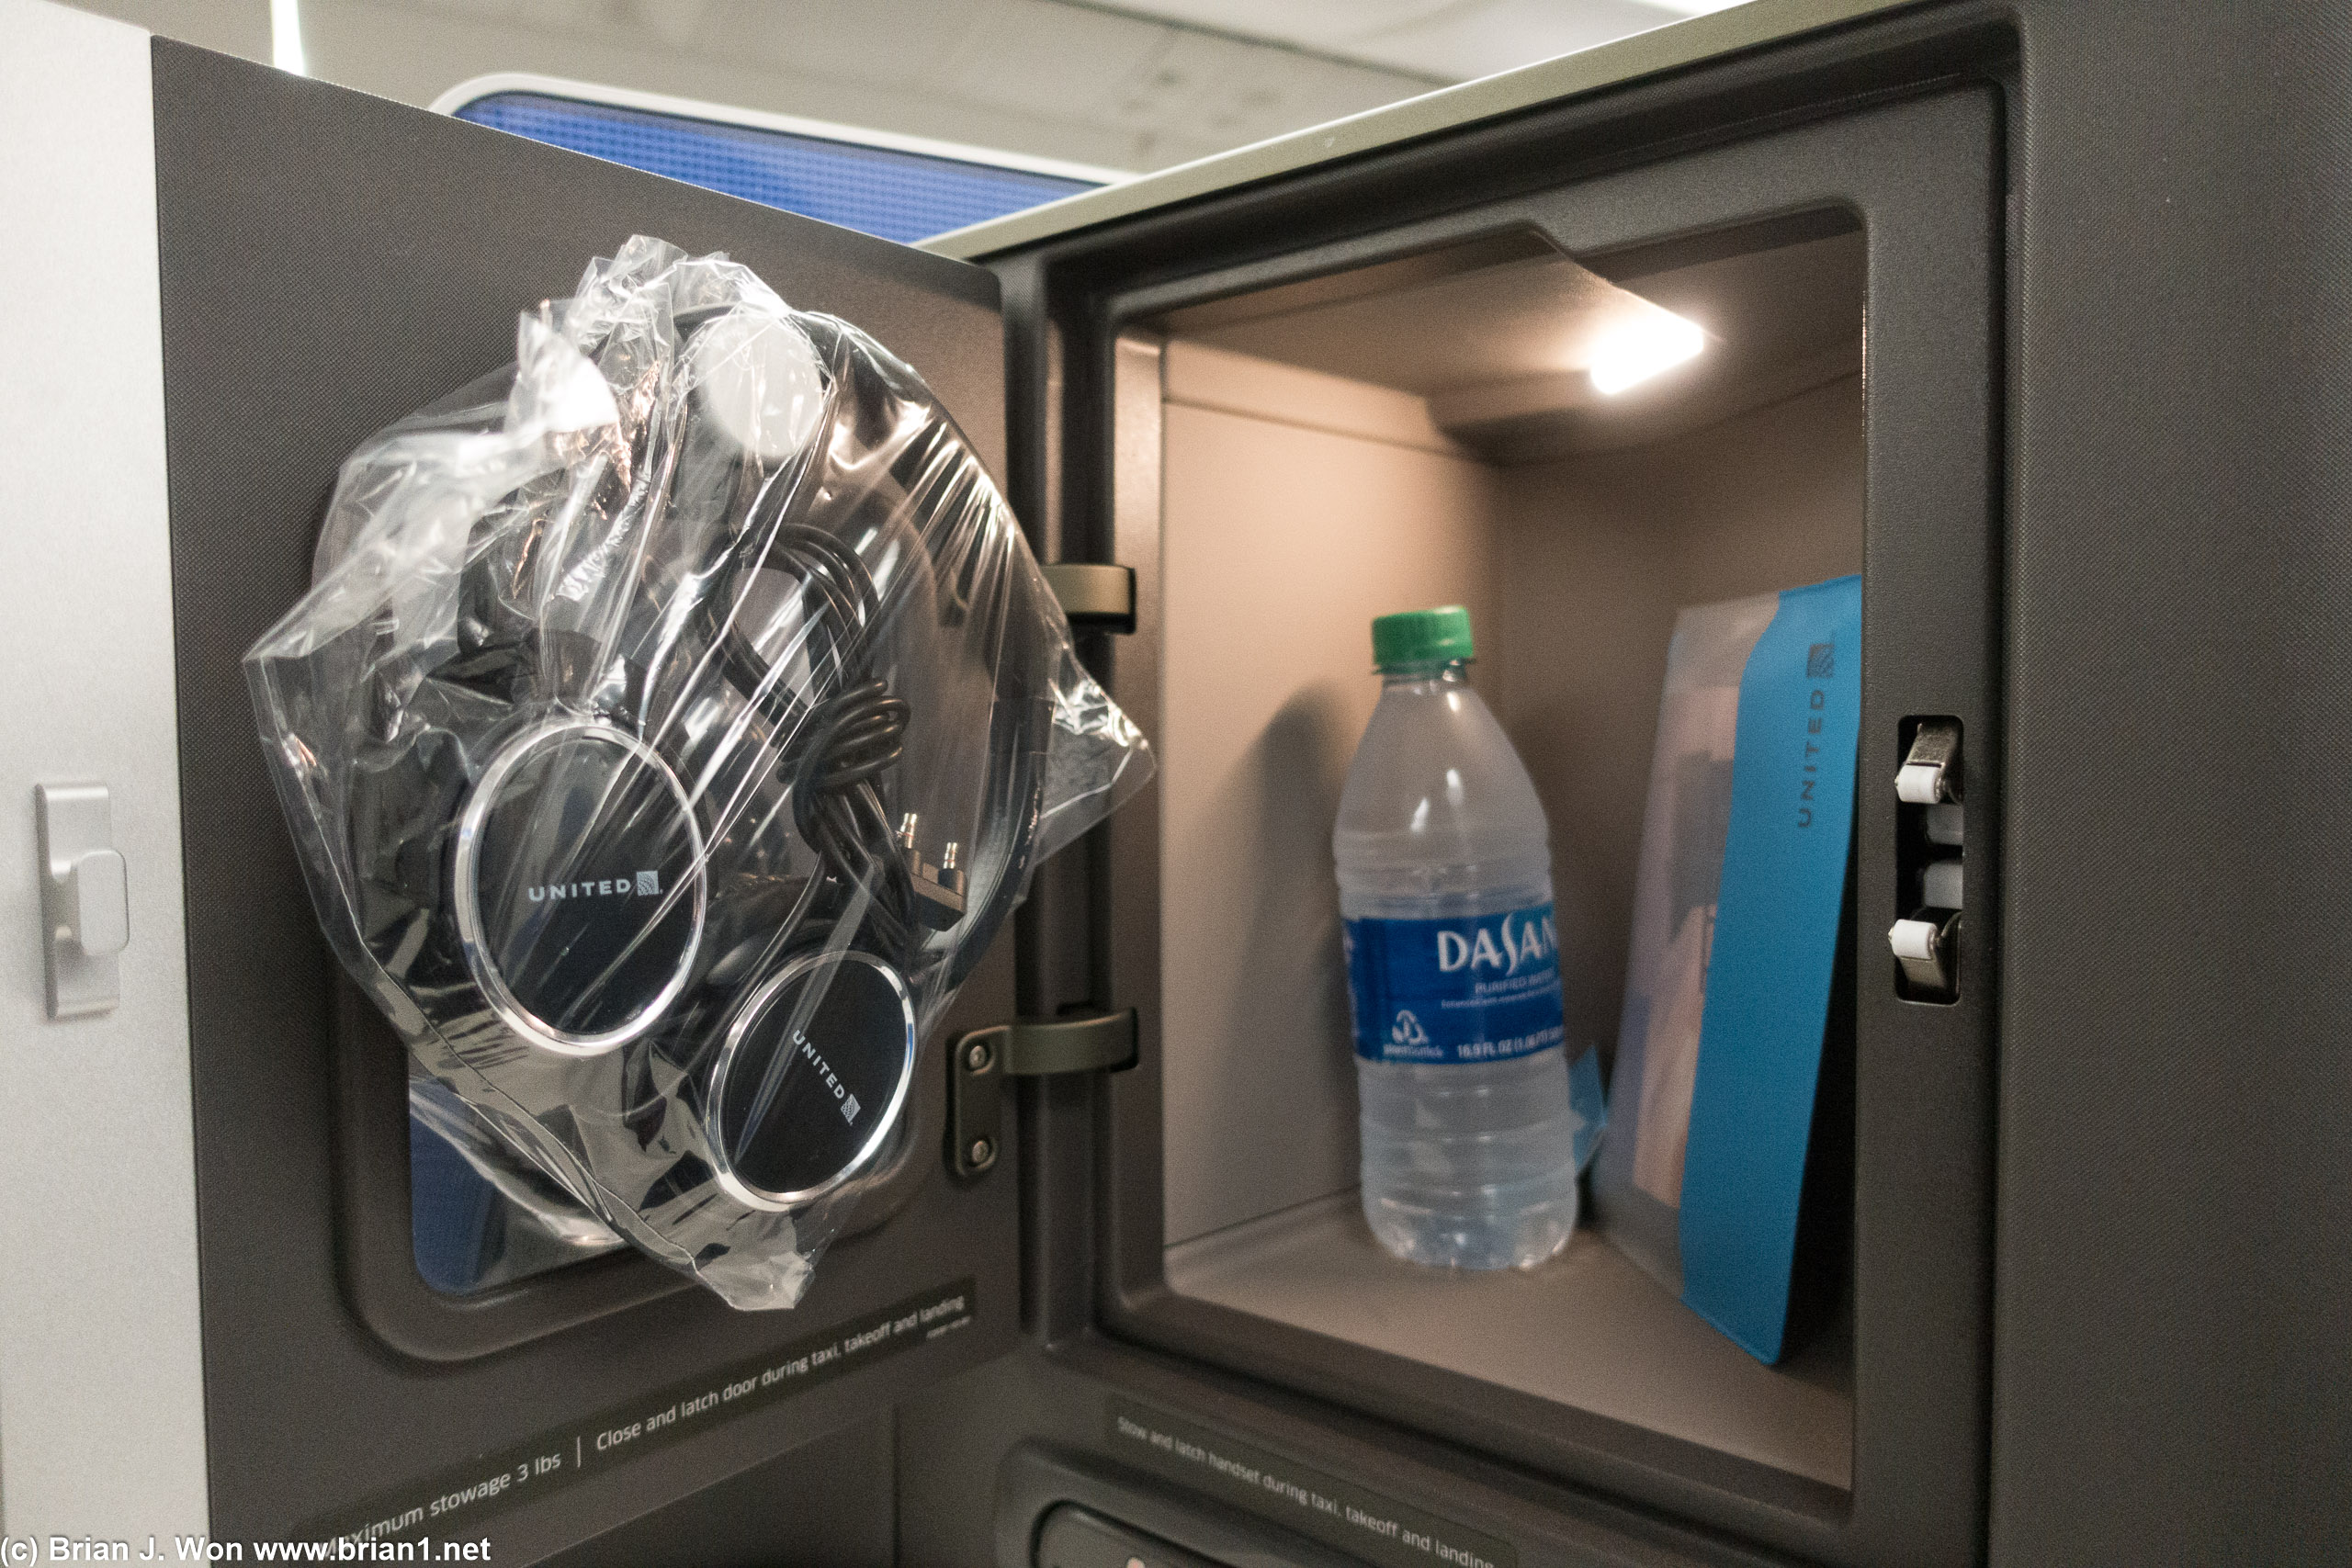 Oooo, bottled water already at your seat? Amenity kit and bottled water already placed thoughtfully in the storage cubby, too.